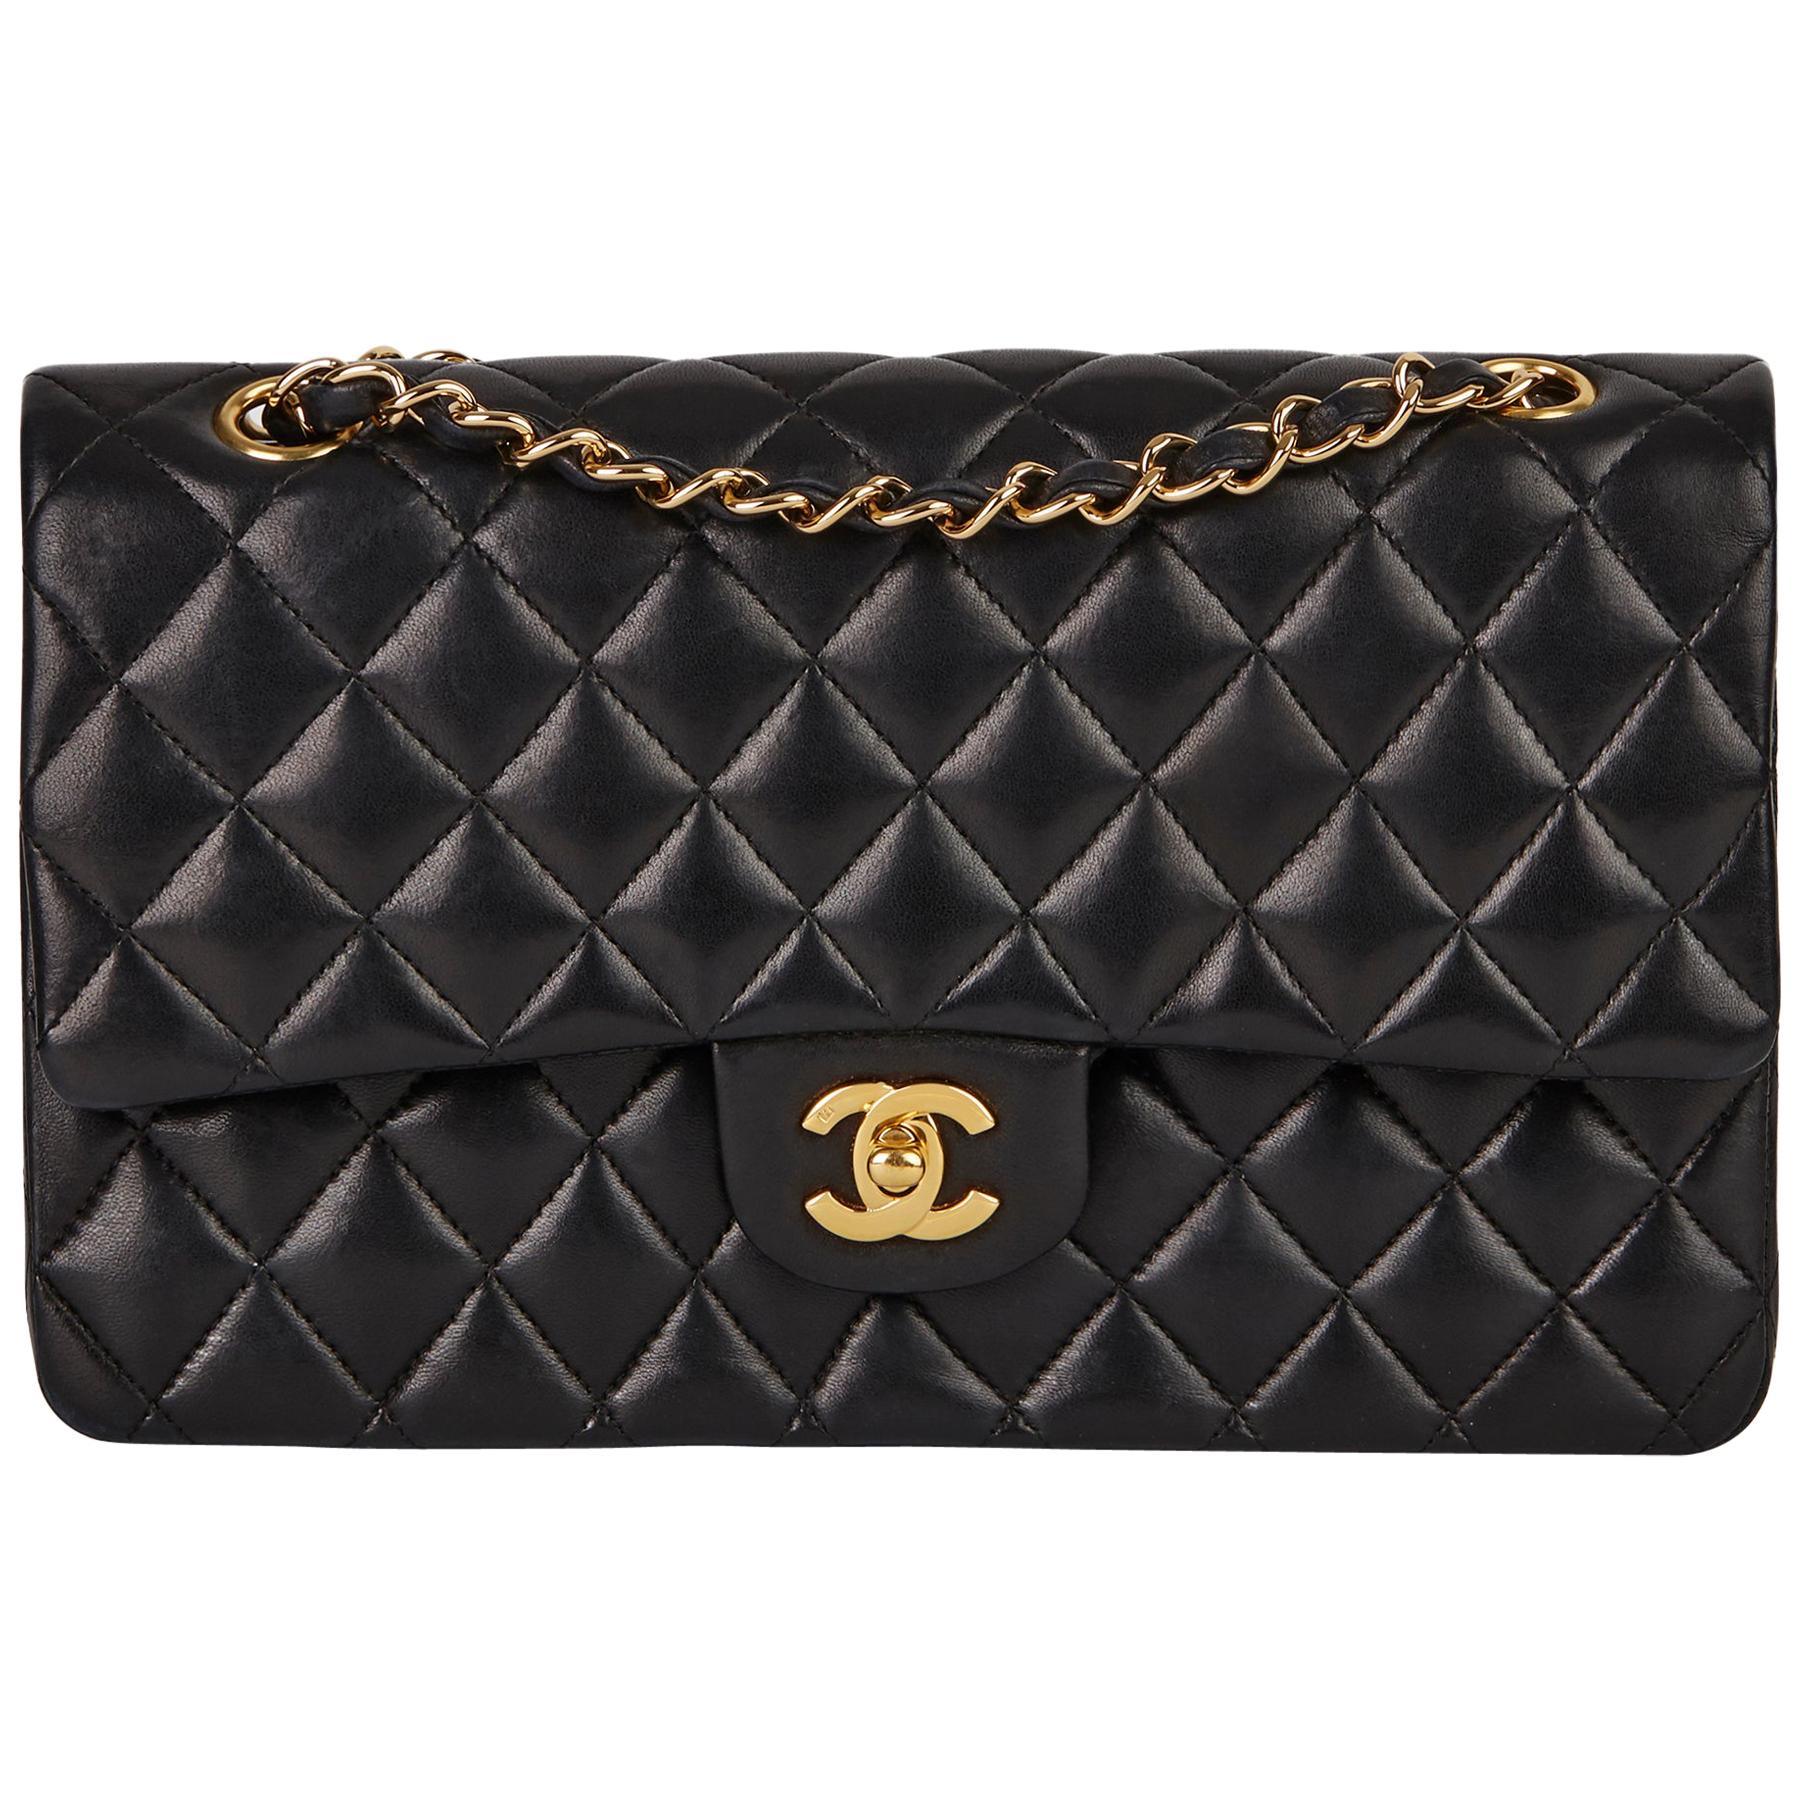 2008 Chanel Black Quilted Lambskin Vintage Medium Classic Double